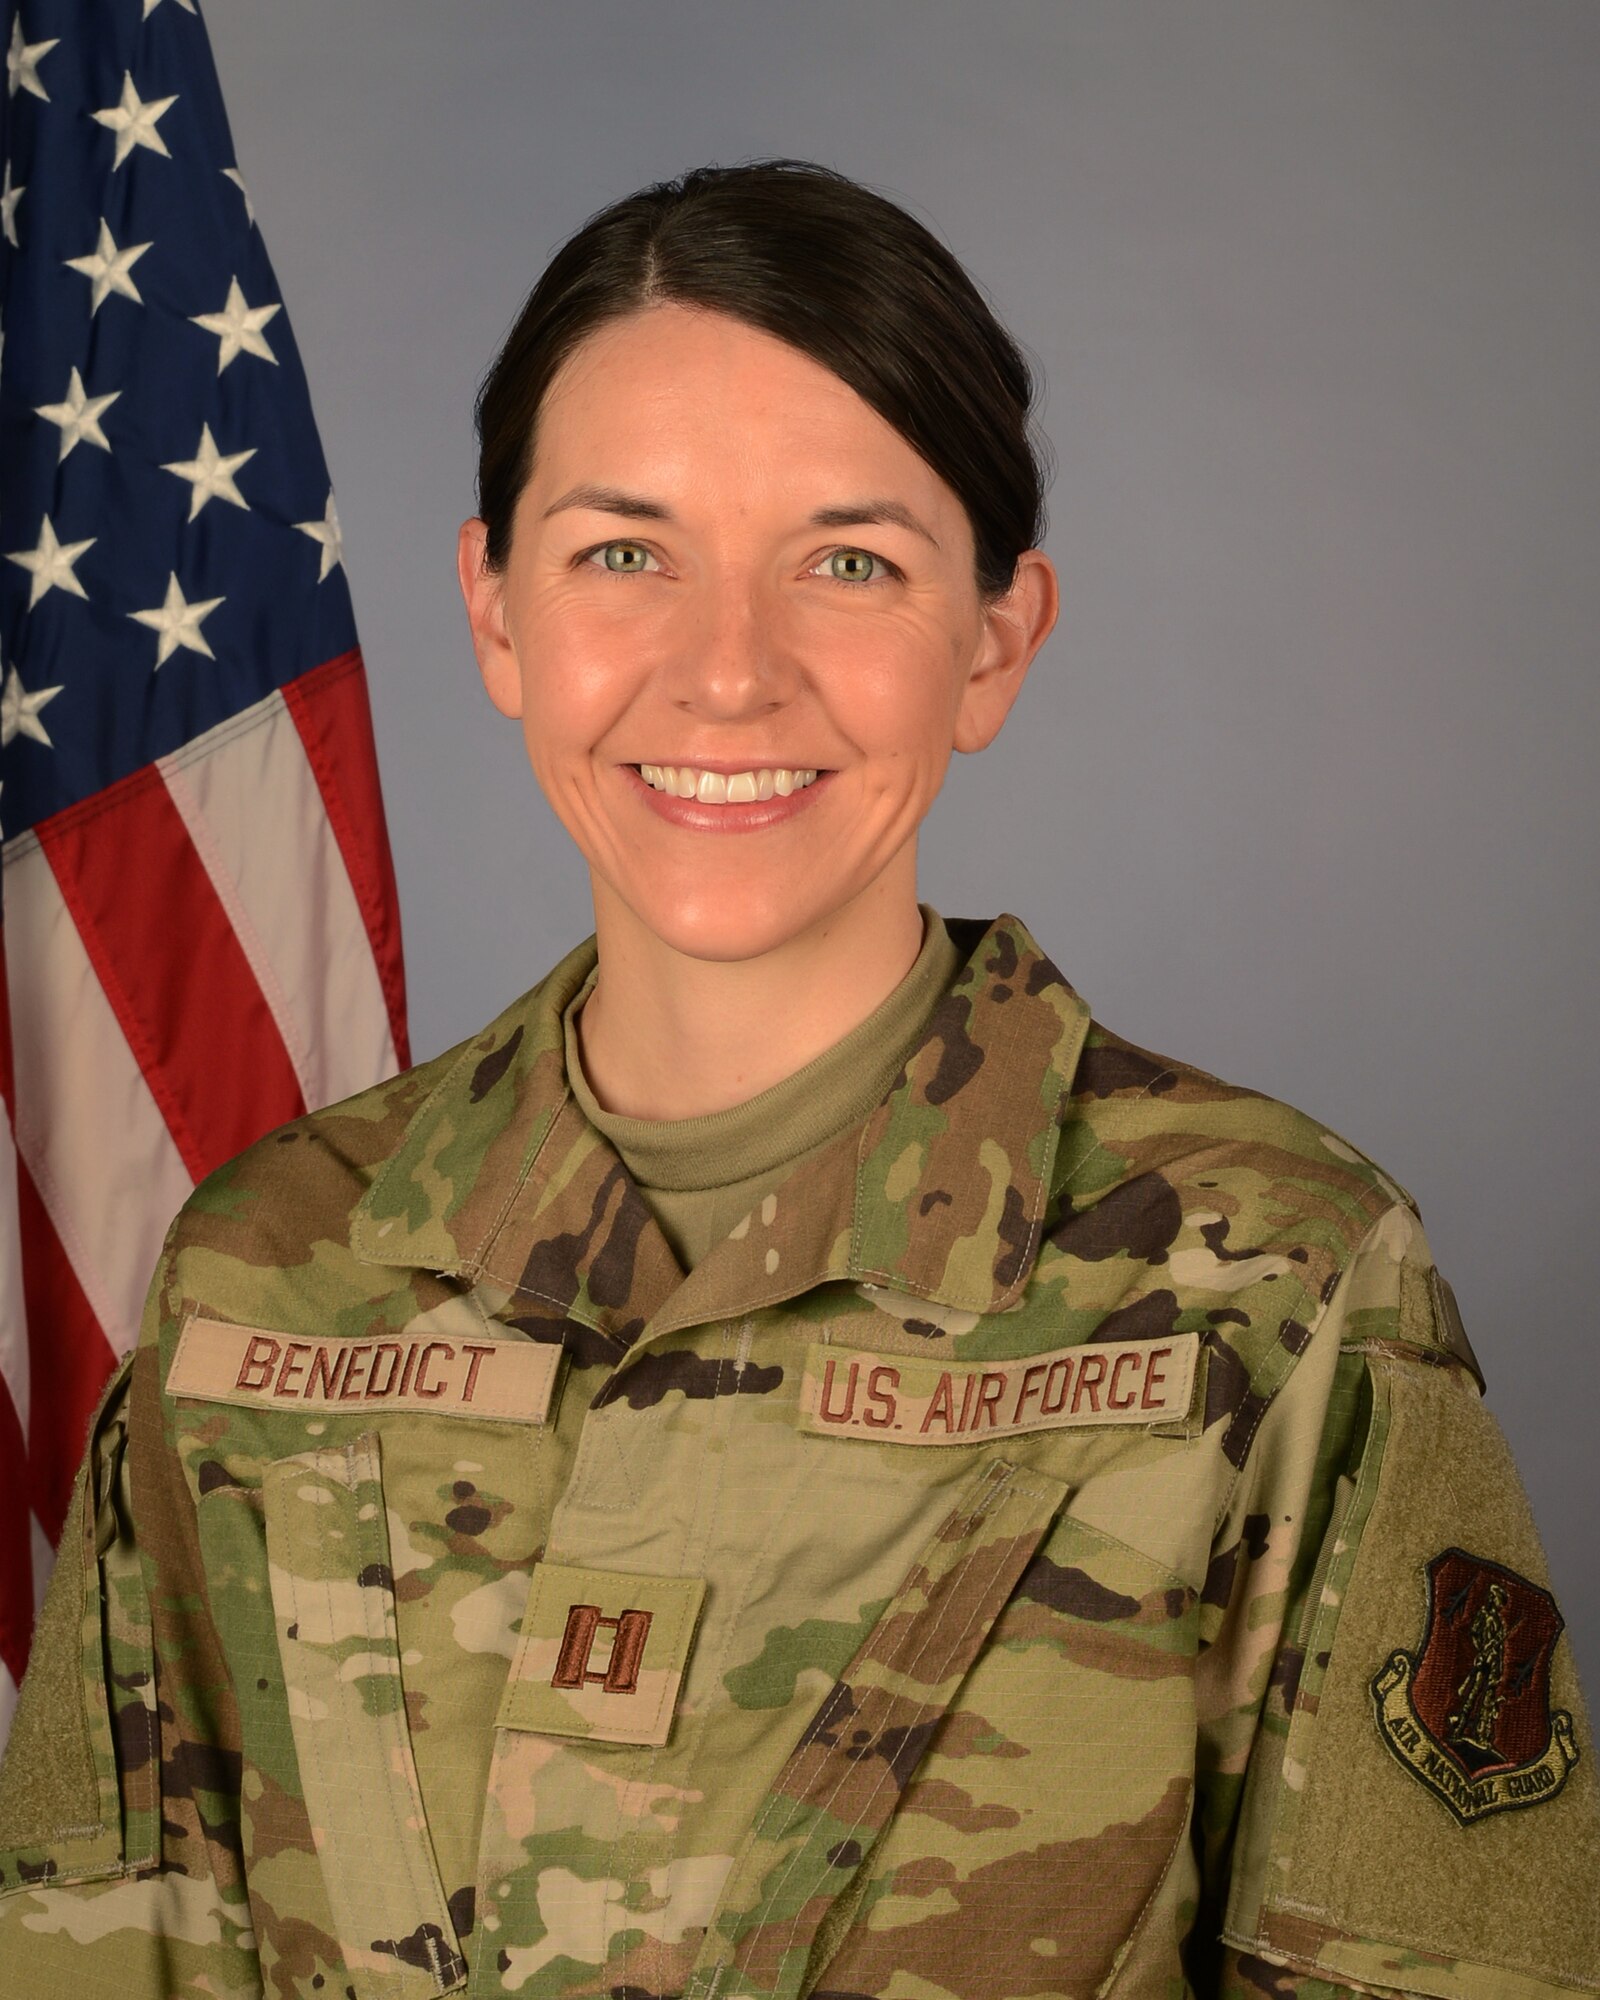 U.S. Air Force Capt. Melissa Benedict, 169th Fighter Wing chaplain, August 15, 2021 at McEntire Joint National Guard Base, South Carolina. (U.S. Air National Guard photo by Senior Master Sgt. Edward Snyder, 169th Fighter Wing Public Affairs)